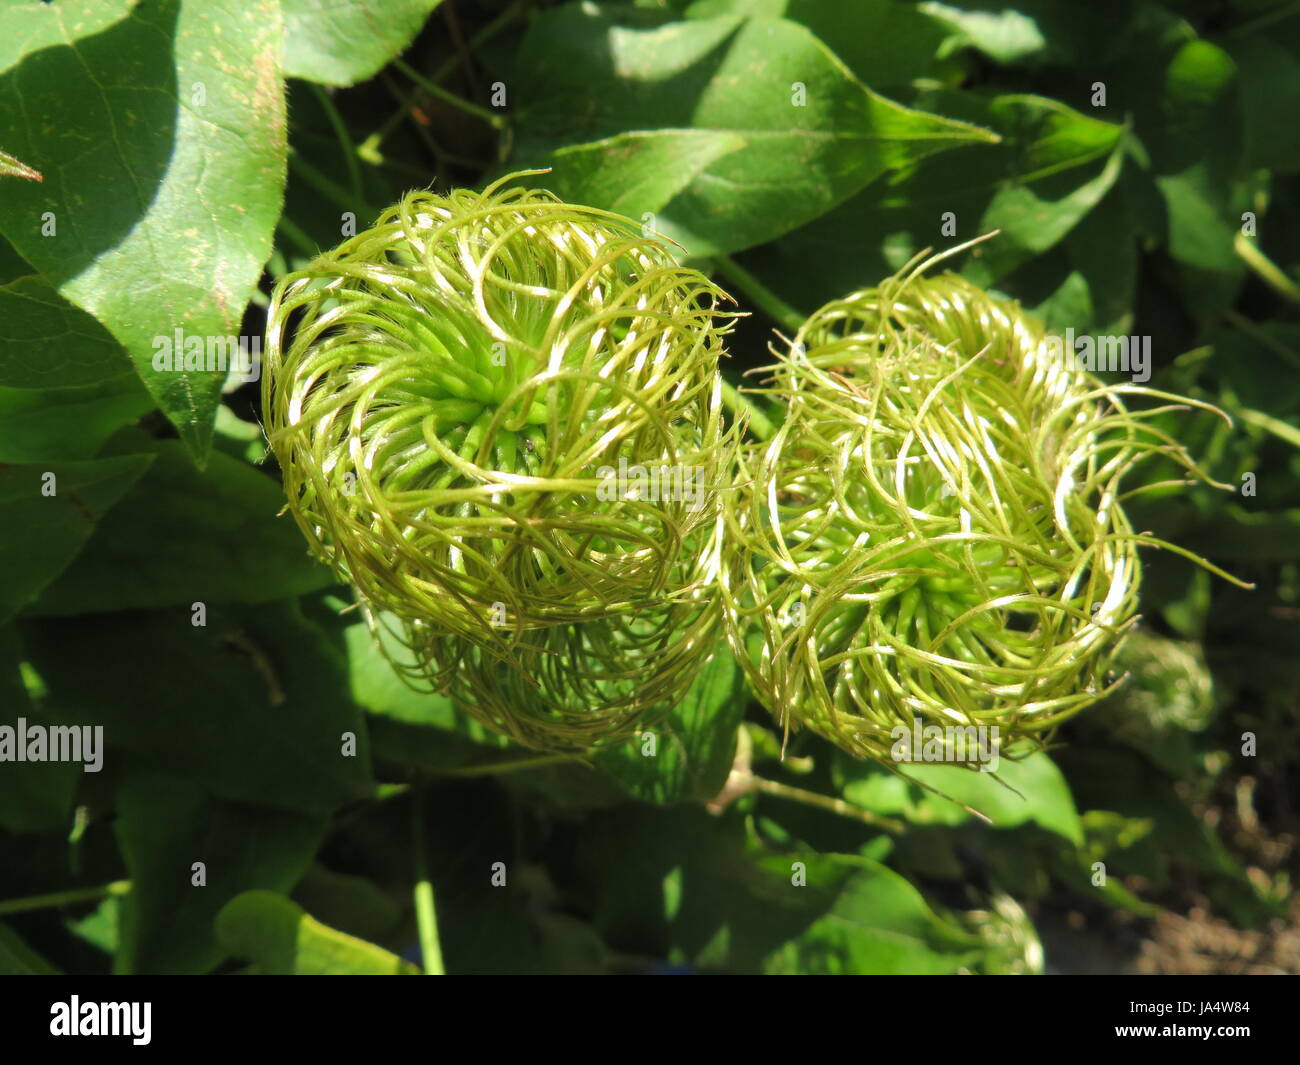 flower, plant, clematis, withers, seed vessel, beautiful, beauteously, nice, Stock Photo